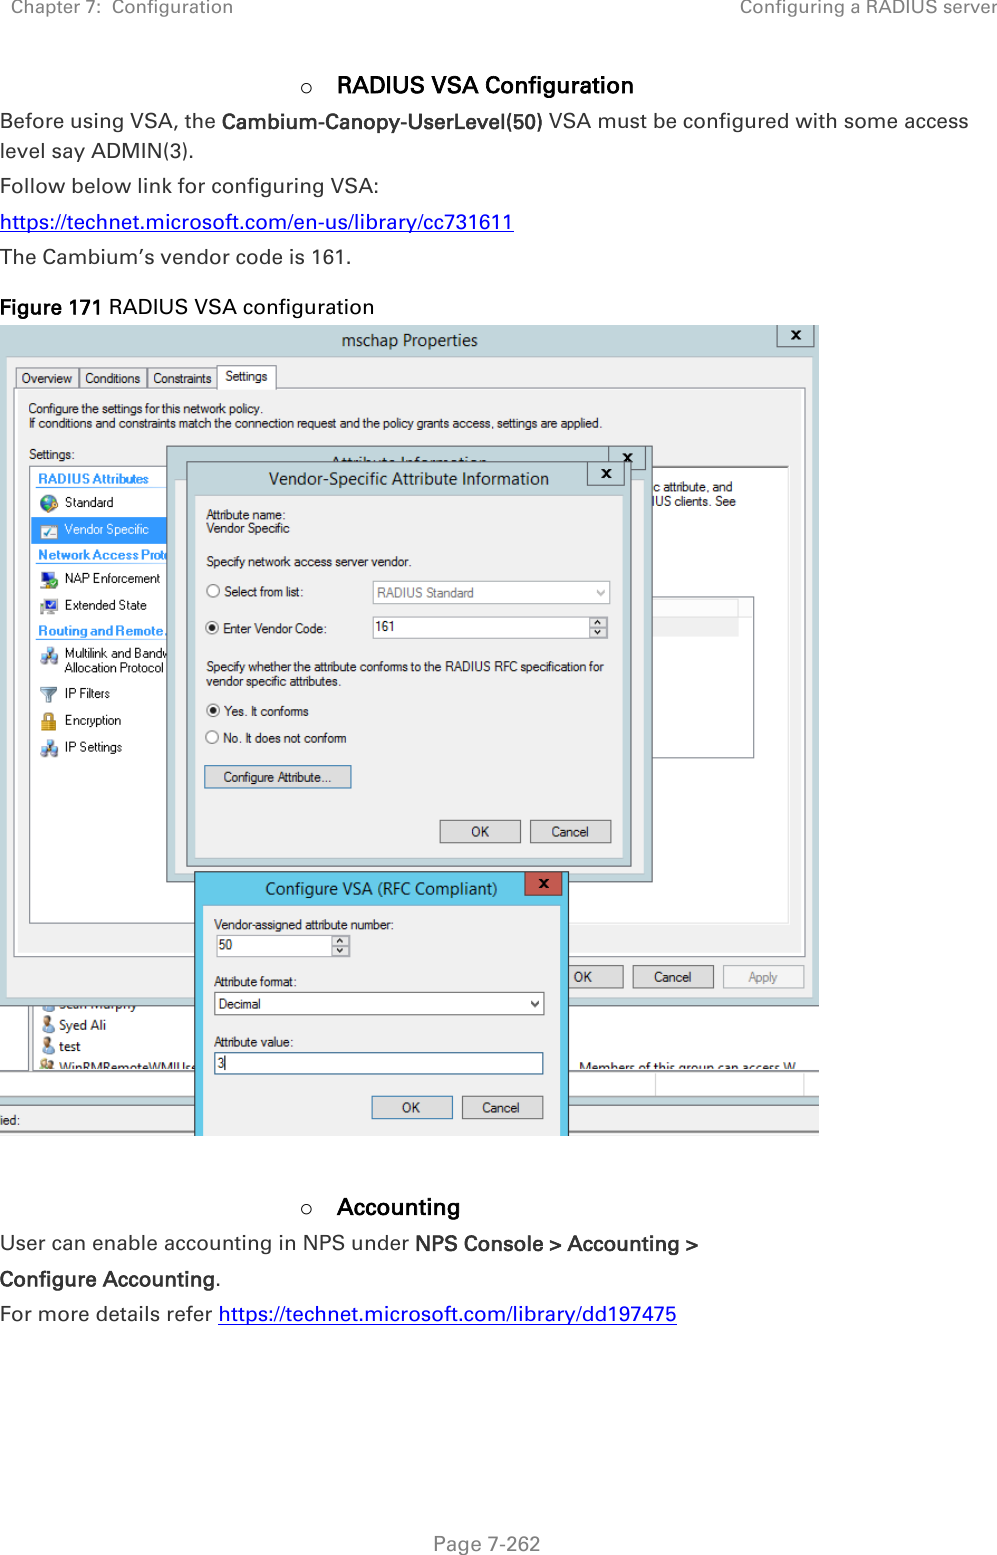 Chapter 7:  Configuration Configuring a RADIUS server   Page 7-262 o RADIUS VSA Configuration Before using VSA, the Cambium-Canopy-UserLevel(50) VSA must be configured with some access level say ADMIN(3). Follow below link for configuring VSA: https://technet.microsoft.com/en-us/library/cc731611  The Cambium’s vendor code is 161. Figure 171 RADIUS VSA configuration   o Accounting User can enable accounting in NPS under NPS Console &gt; Accounting &gt;  Configure Accounting. For more details refer https://technet.microsoft.com/library/dd197475    